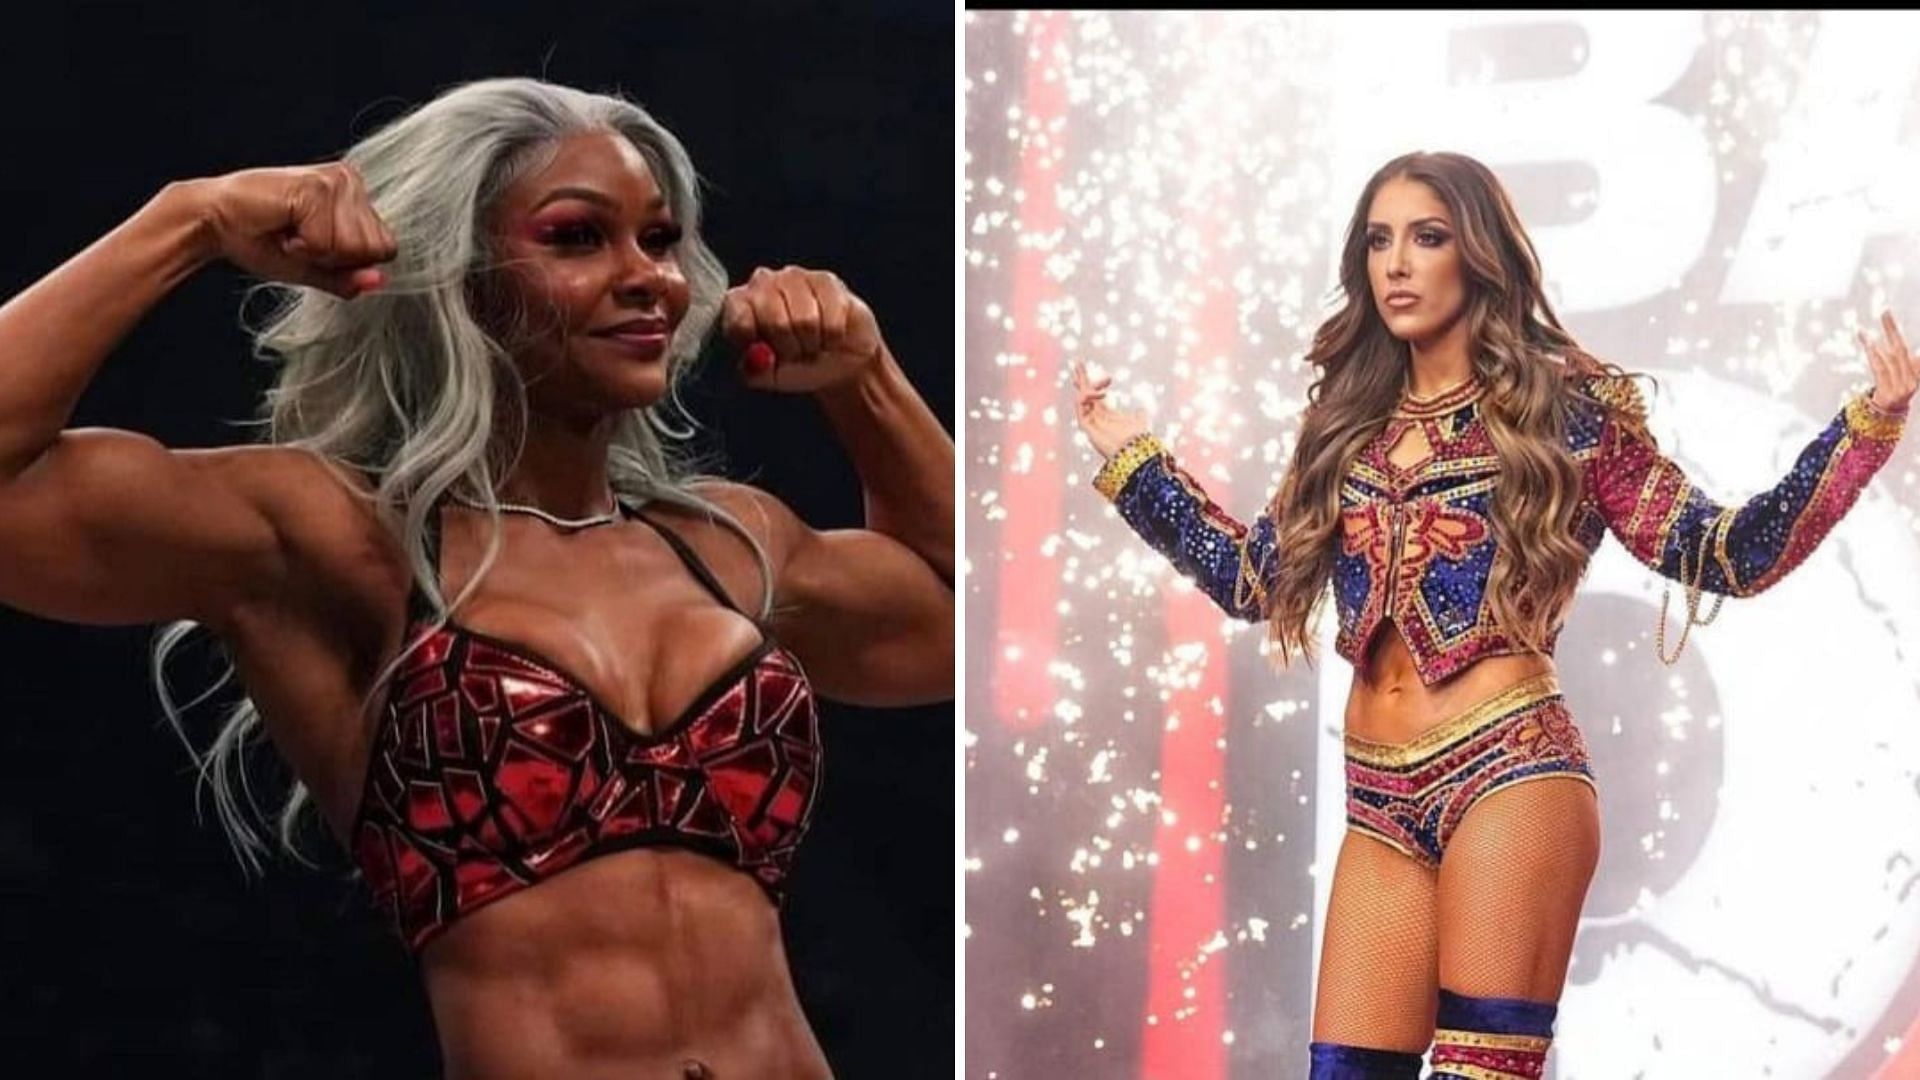 Britt Baker and Jade Cargill are two of the most popular wrestlers today.